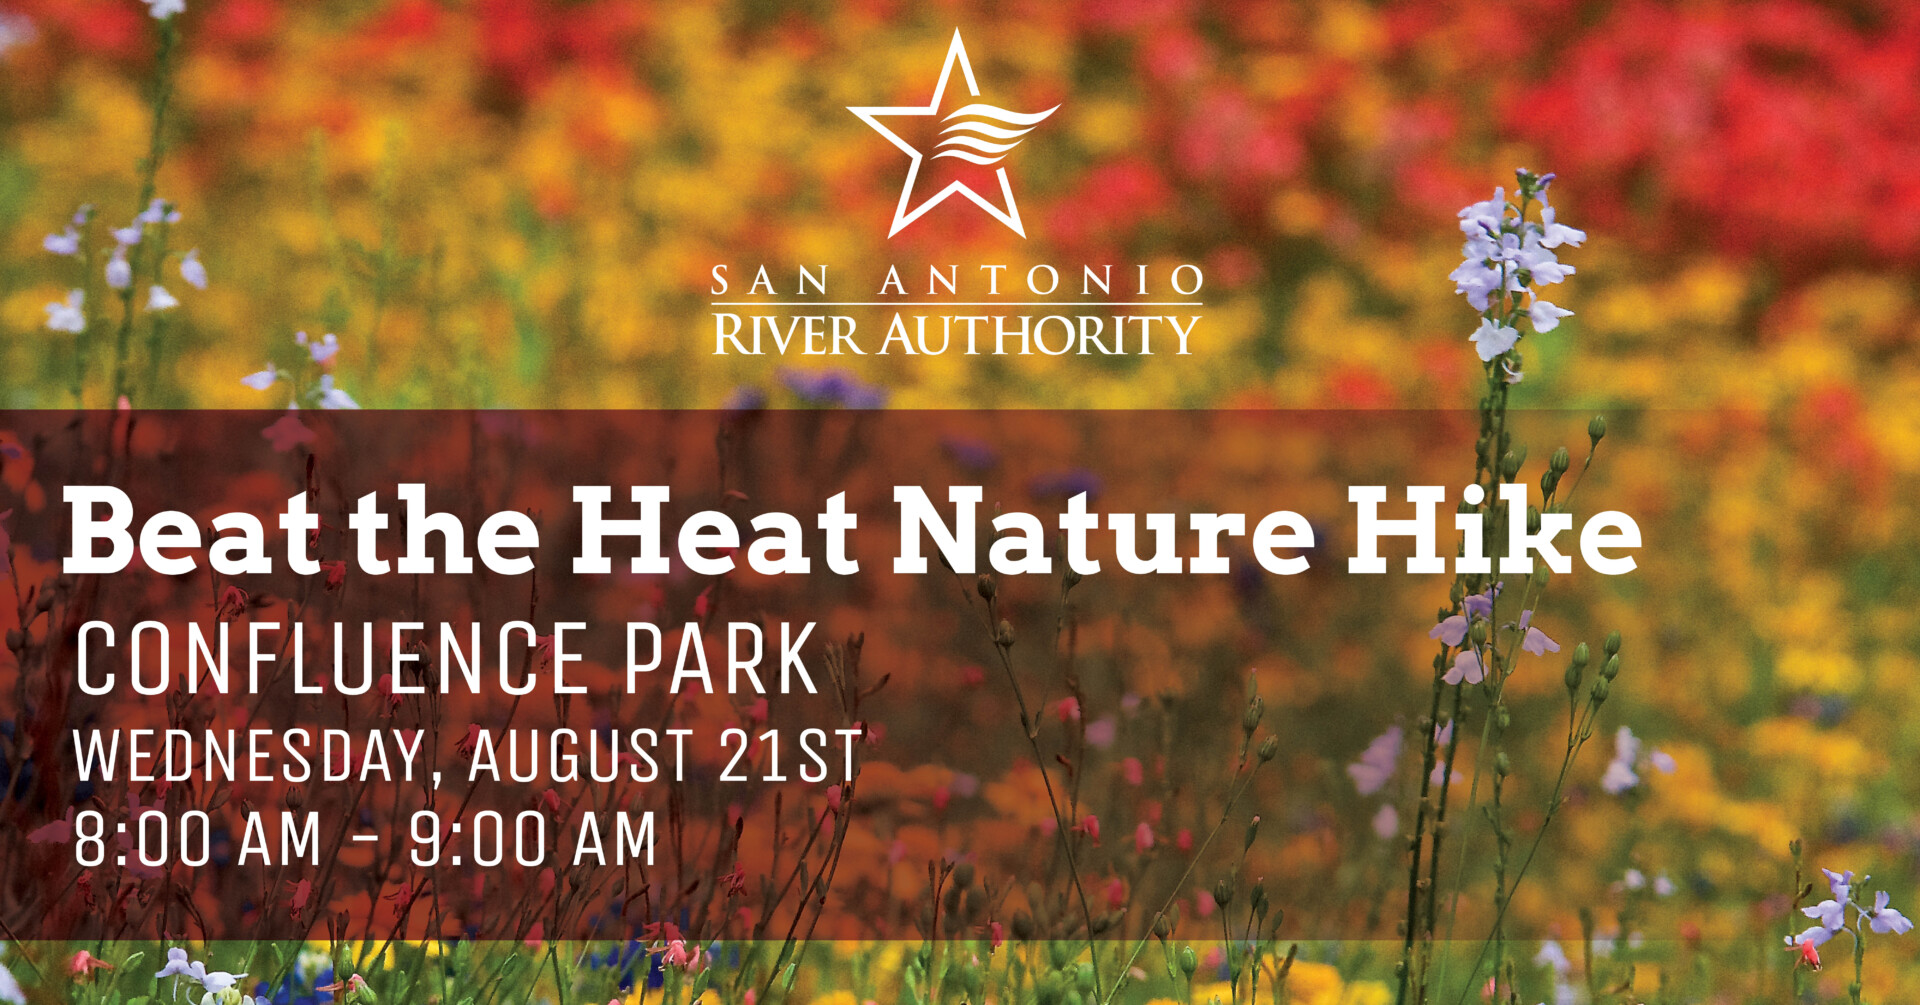 Beat the Heat Nature Hike Confluence Park